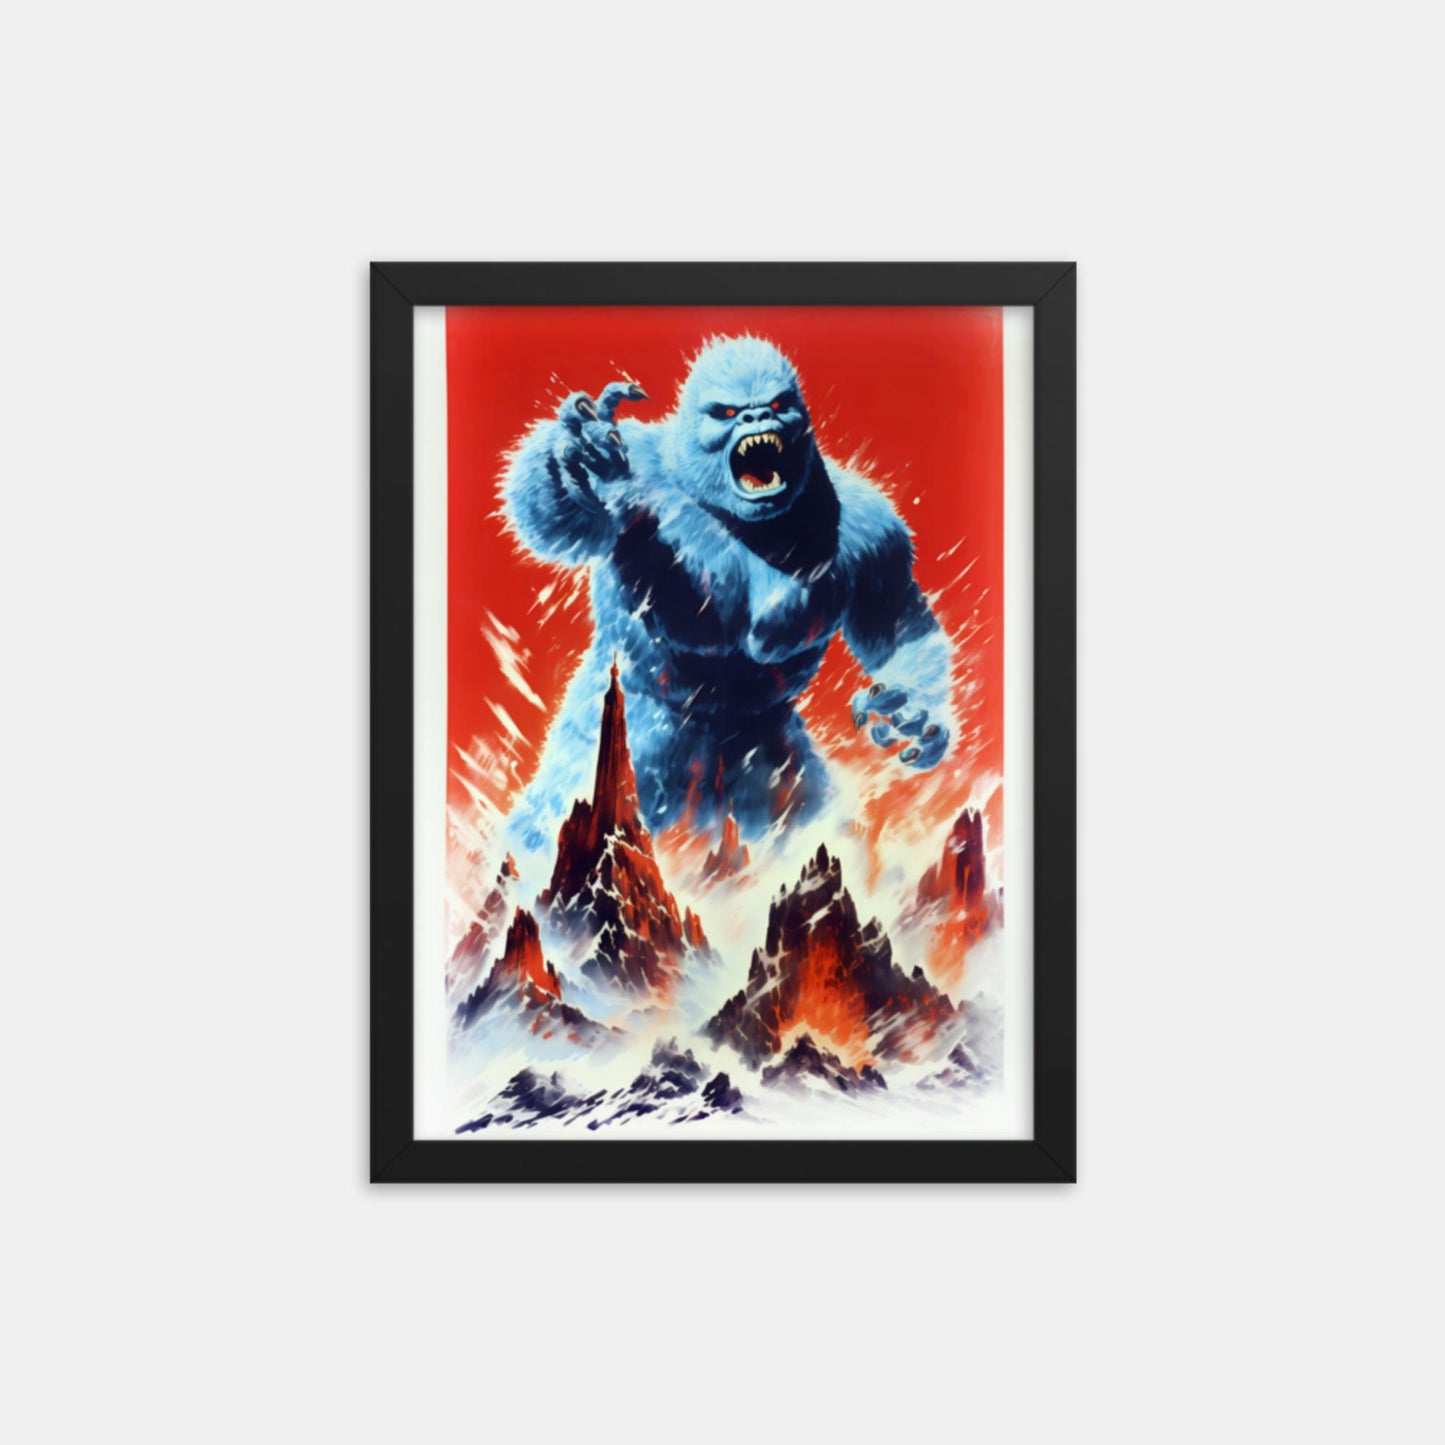 The Abominable Snowman Framed Print